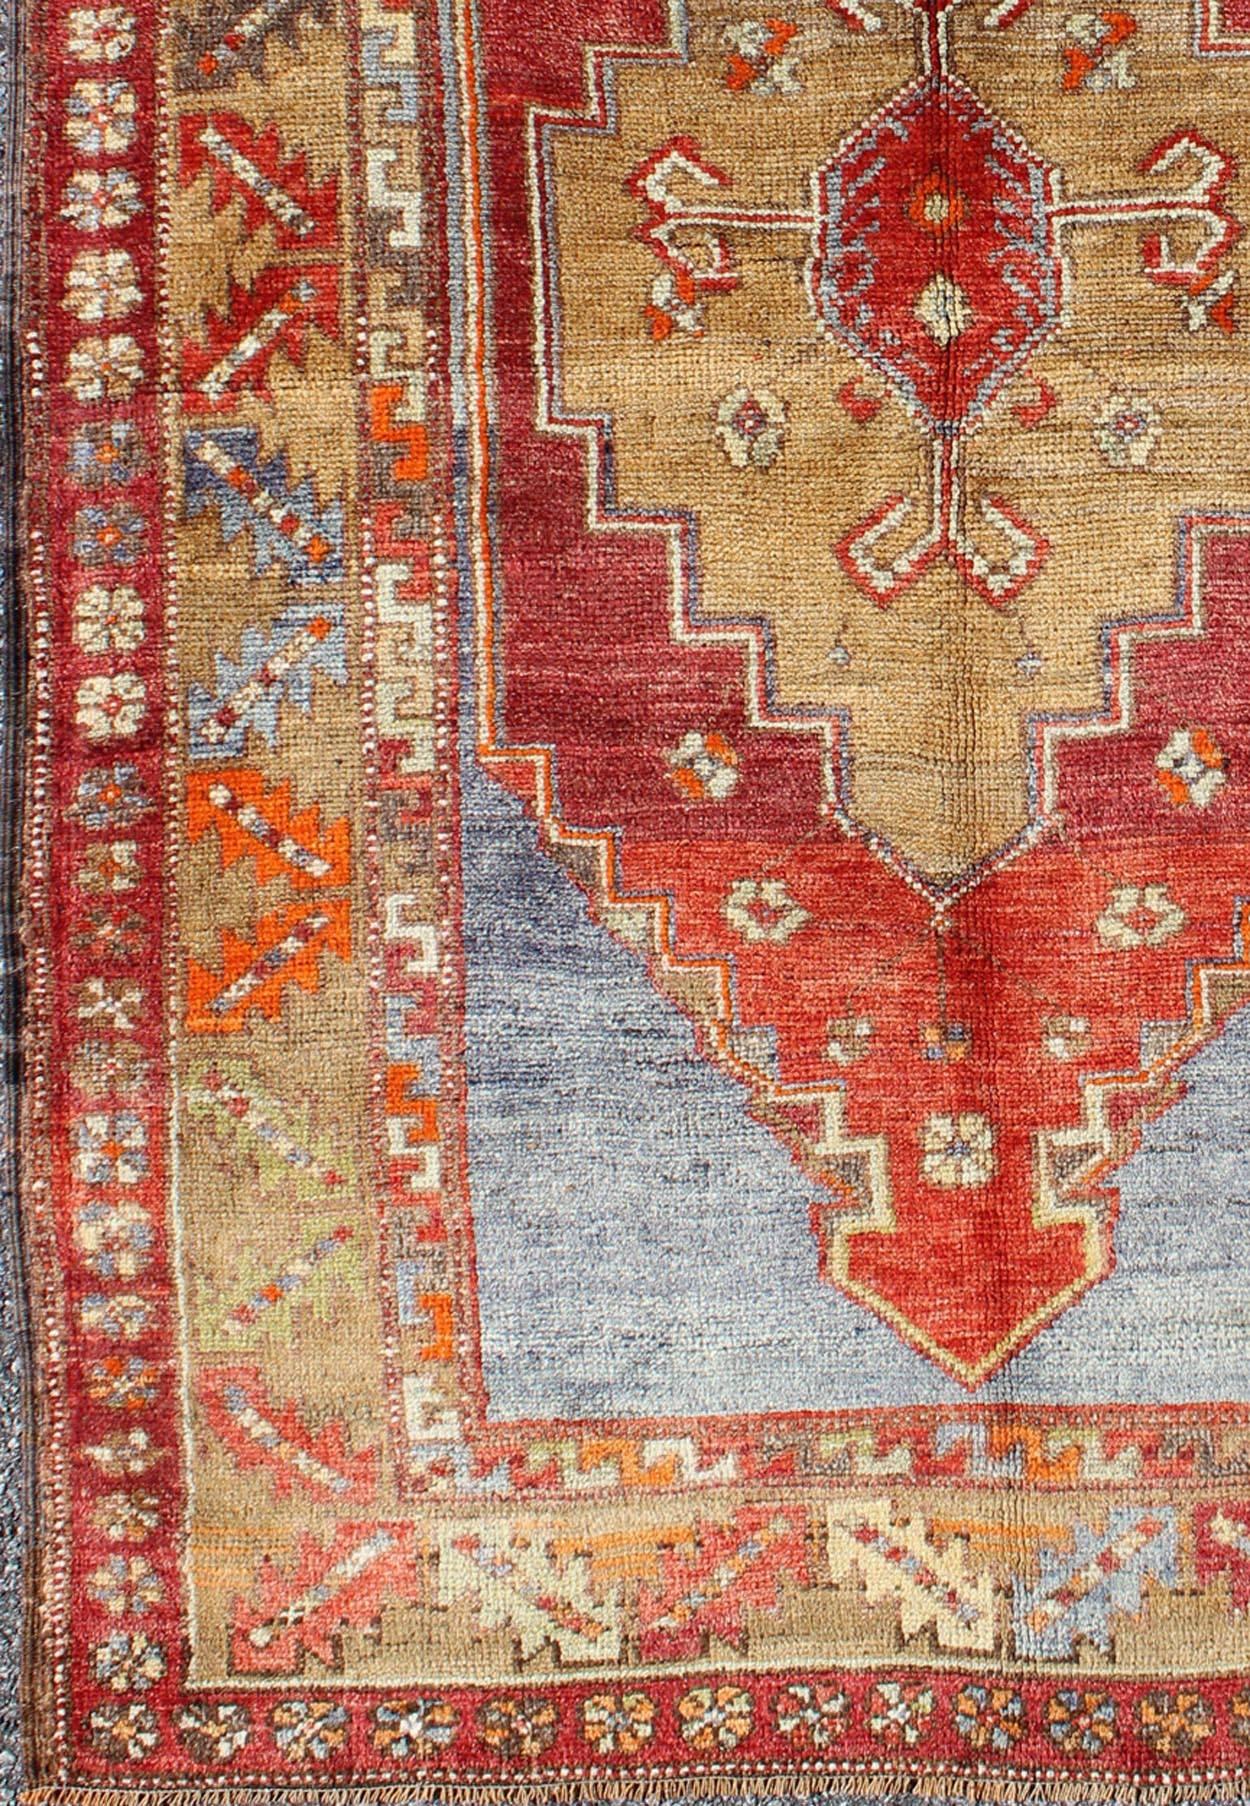 Multicolored vintage Turkish Oushak rug with Layered Geometric Medallion, rug en-140236, country of origin / type: Turkey / Oushak, circa 1940

This vintage Turkish Oushak rug features an intricately beautiful design with a tribal-geometric